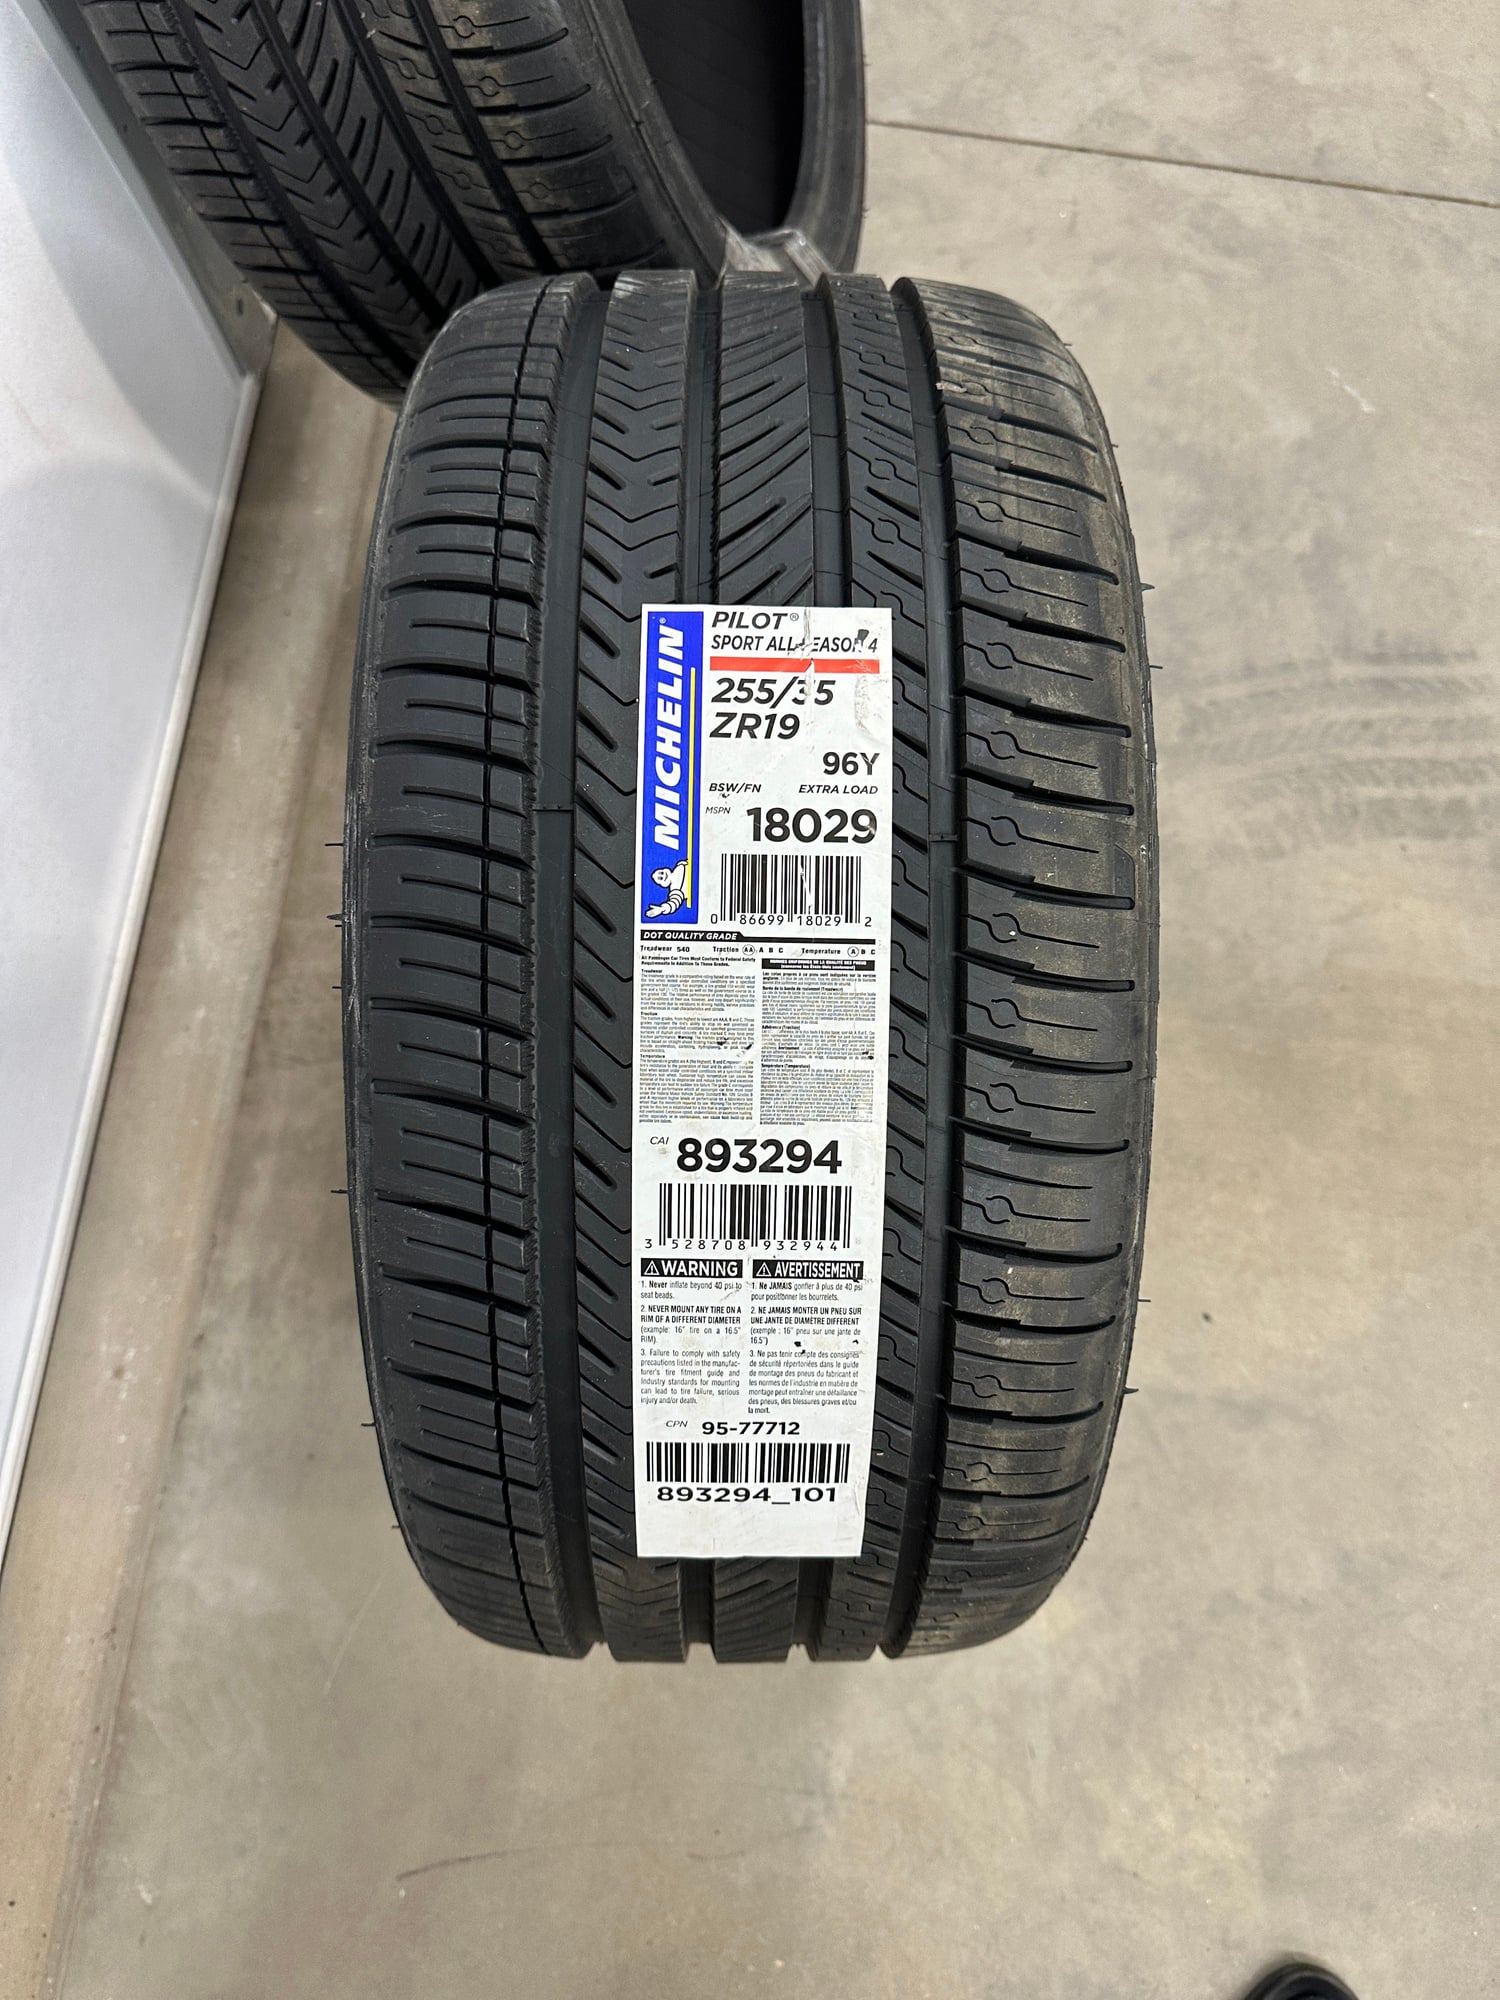 Wheels and Tires/Axles - Pilot Sport All Season 4. 255/35/19 & 275/35/19 - New - 2019 to 2021 Mercedes-Benz C63 AMG S - Clovis, NM 88101, United States